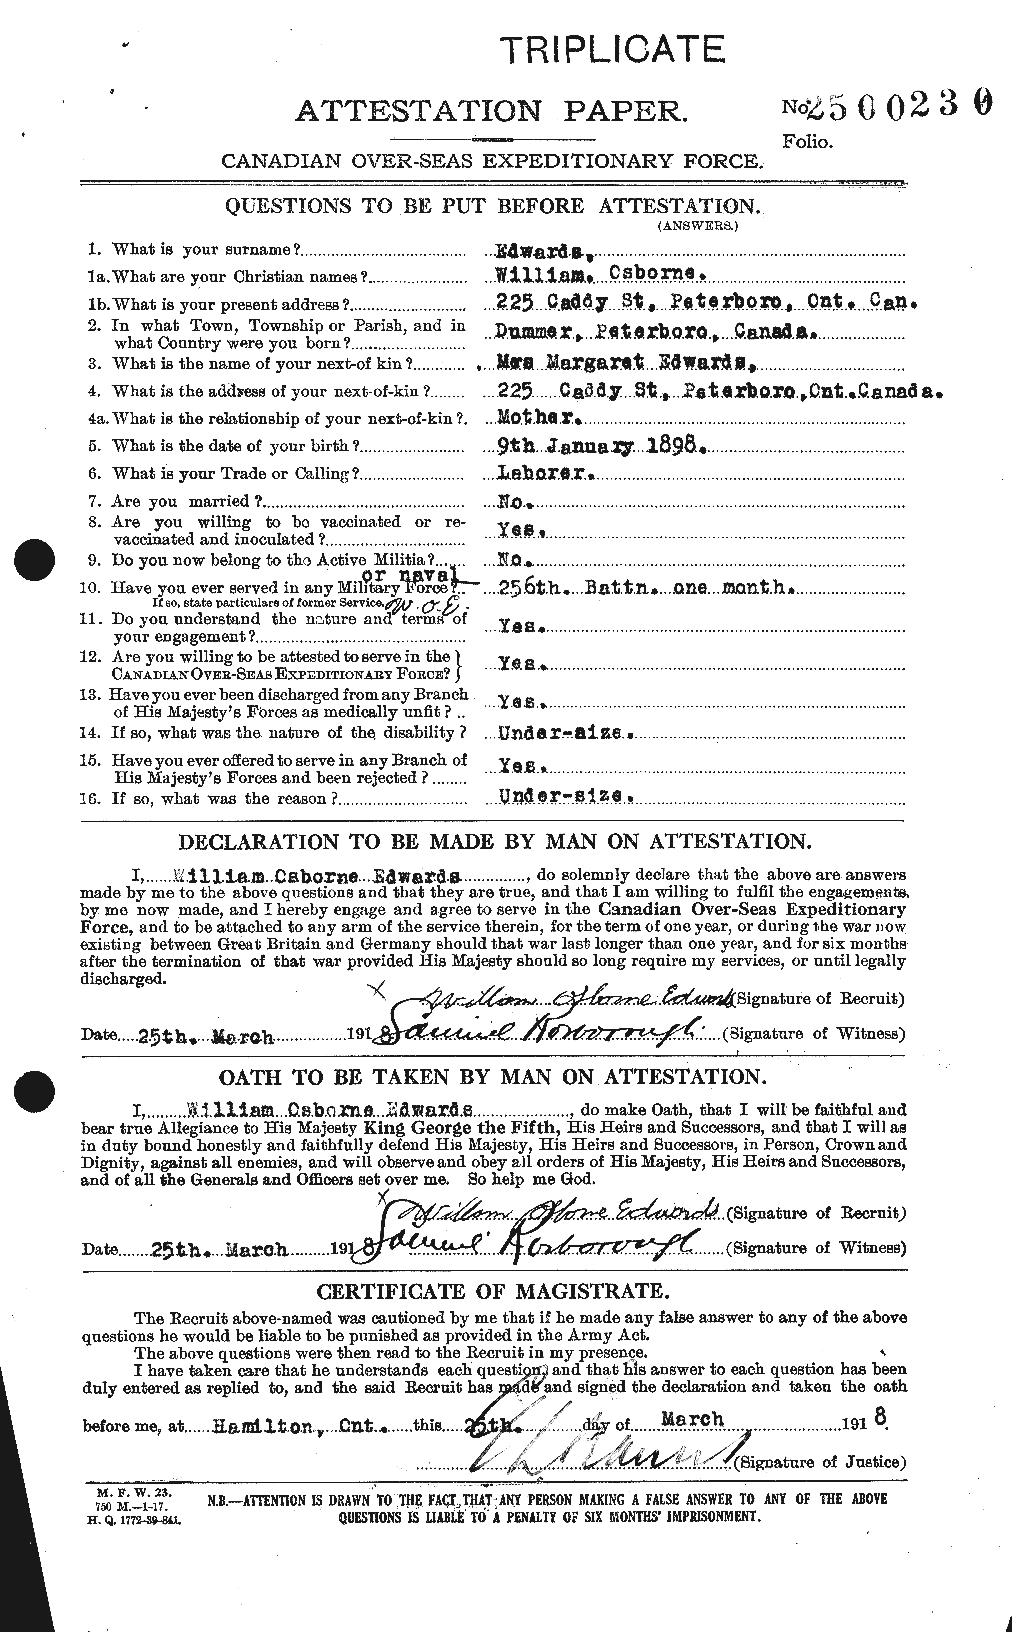 Personnel Records of the First World War - CEF 311936a